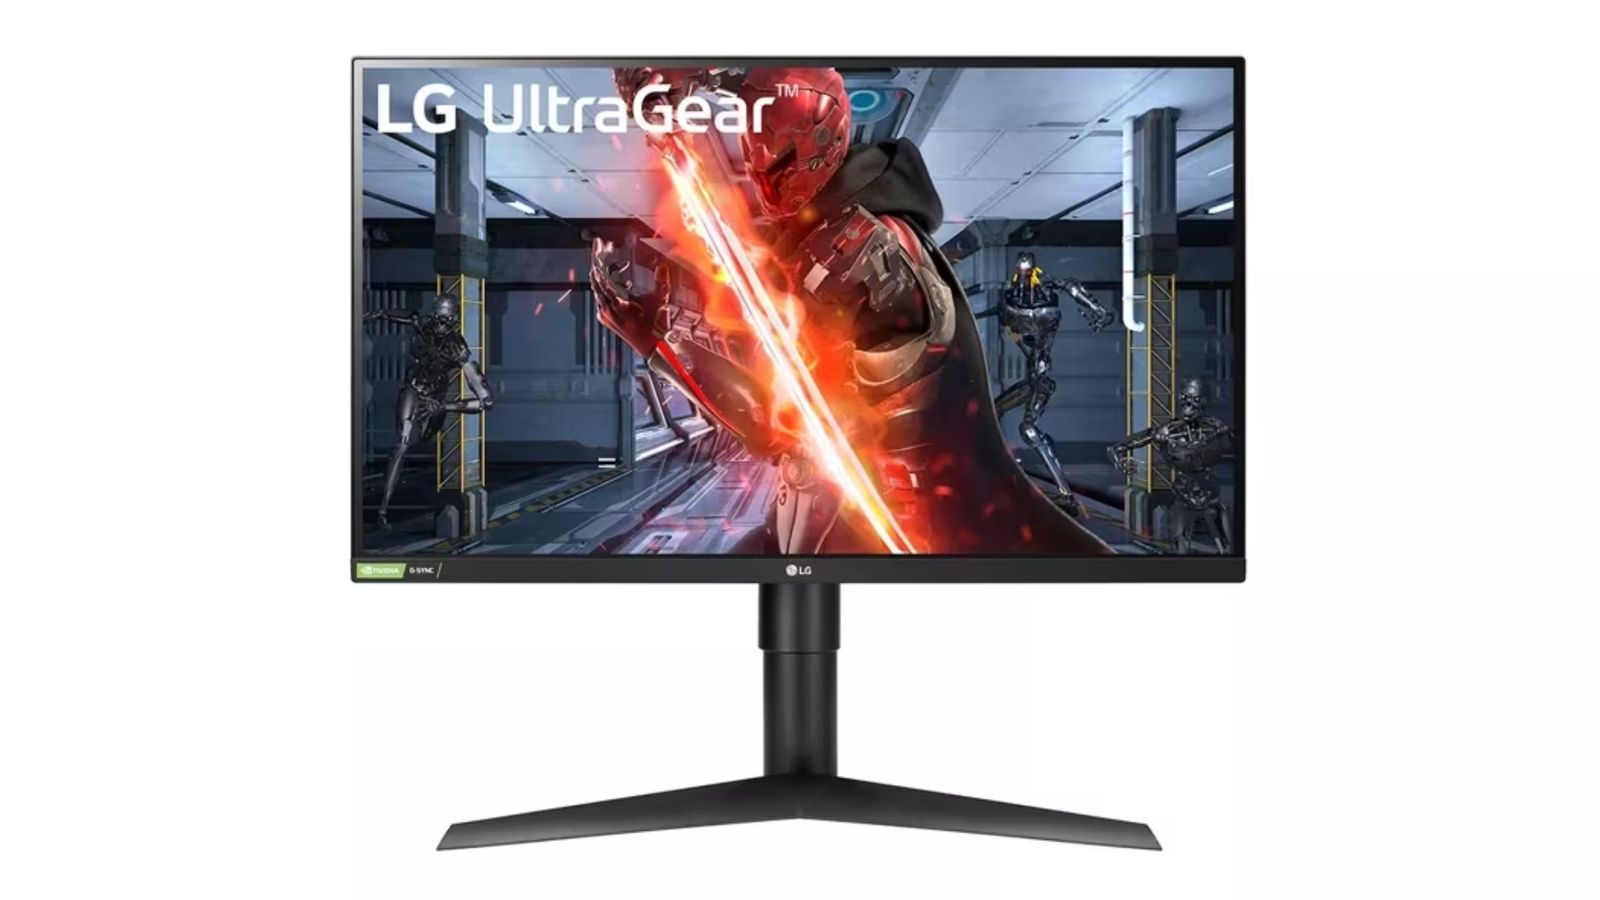 LG Ultragear 27GL83A-B product image of a black monitor with a character with a red helmet on holding a flaming sword on the display.